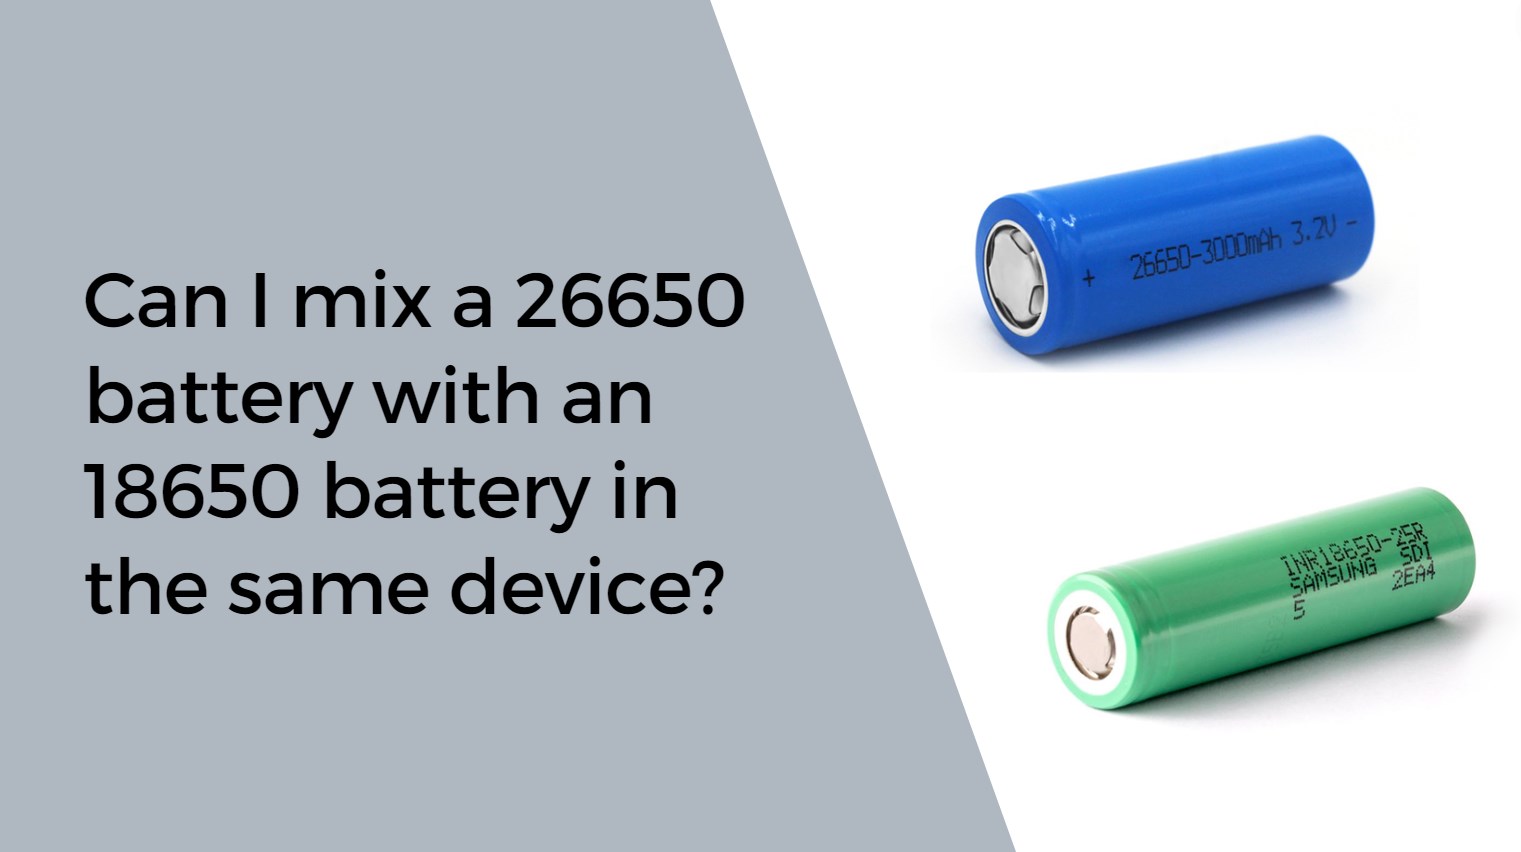 Can I mix a 26650 battery with an 18650 battery in the same device?